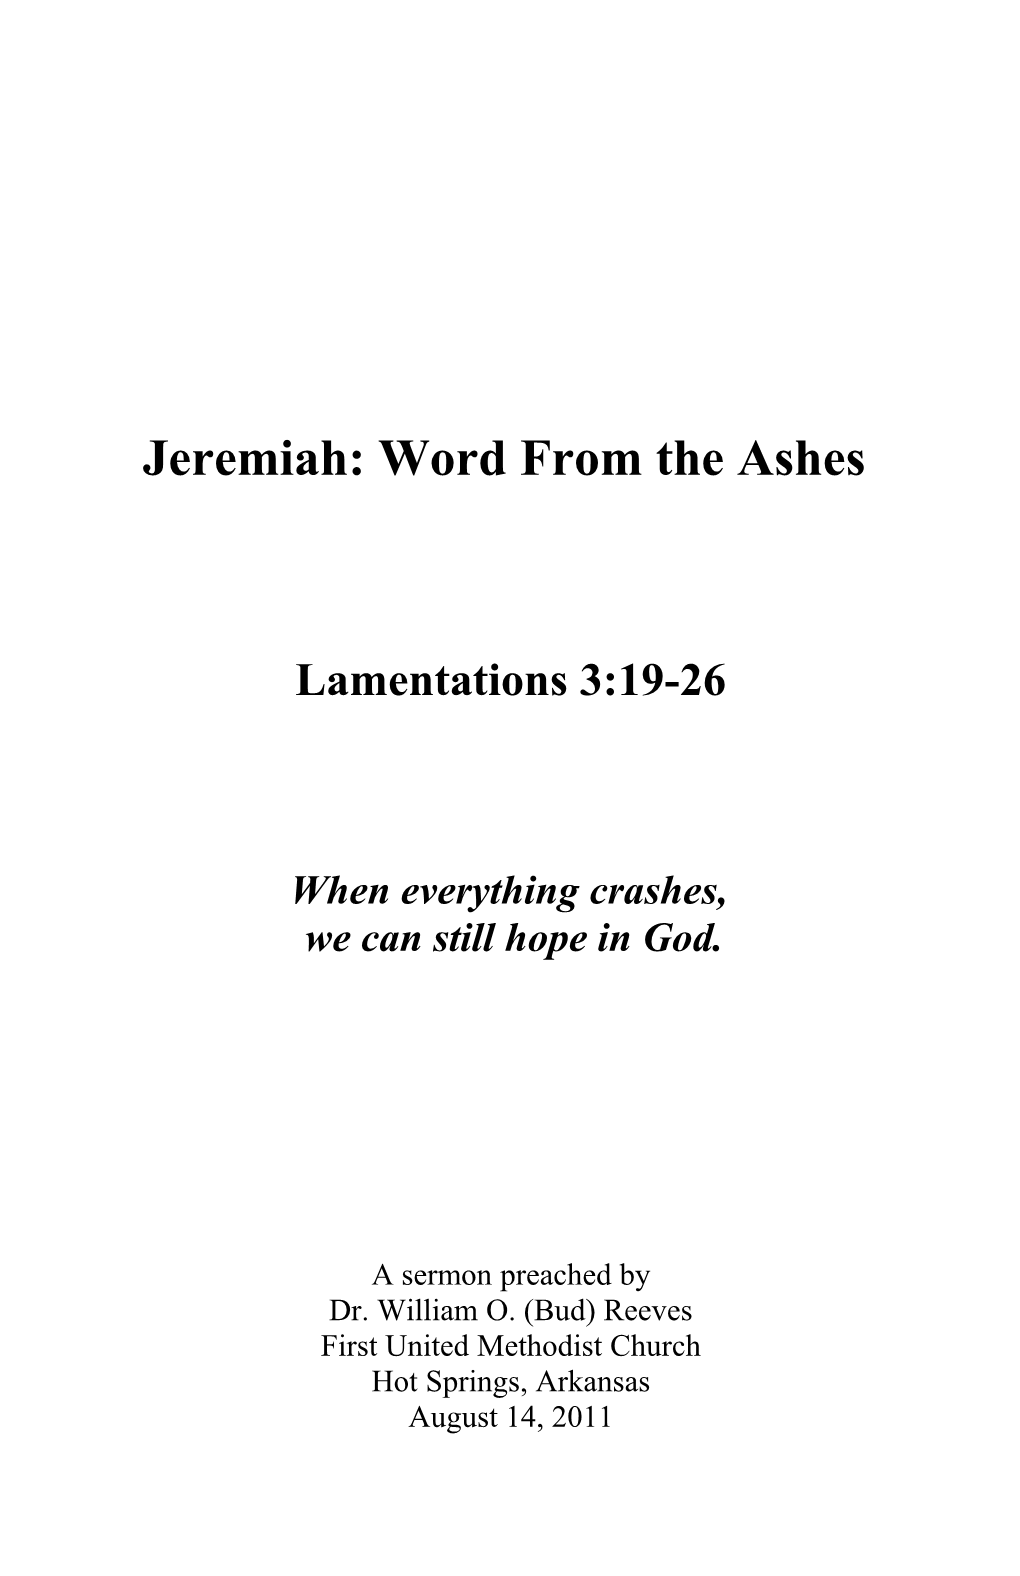 Jeremiah: Word from the Ashes